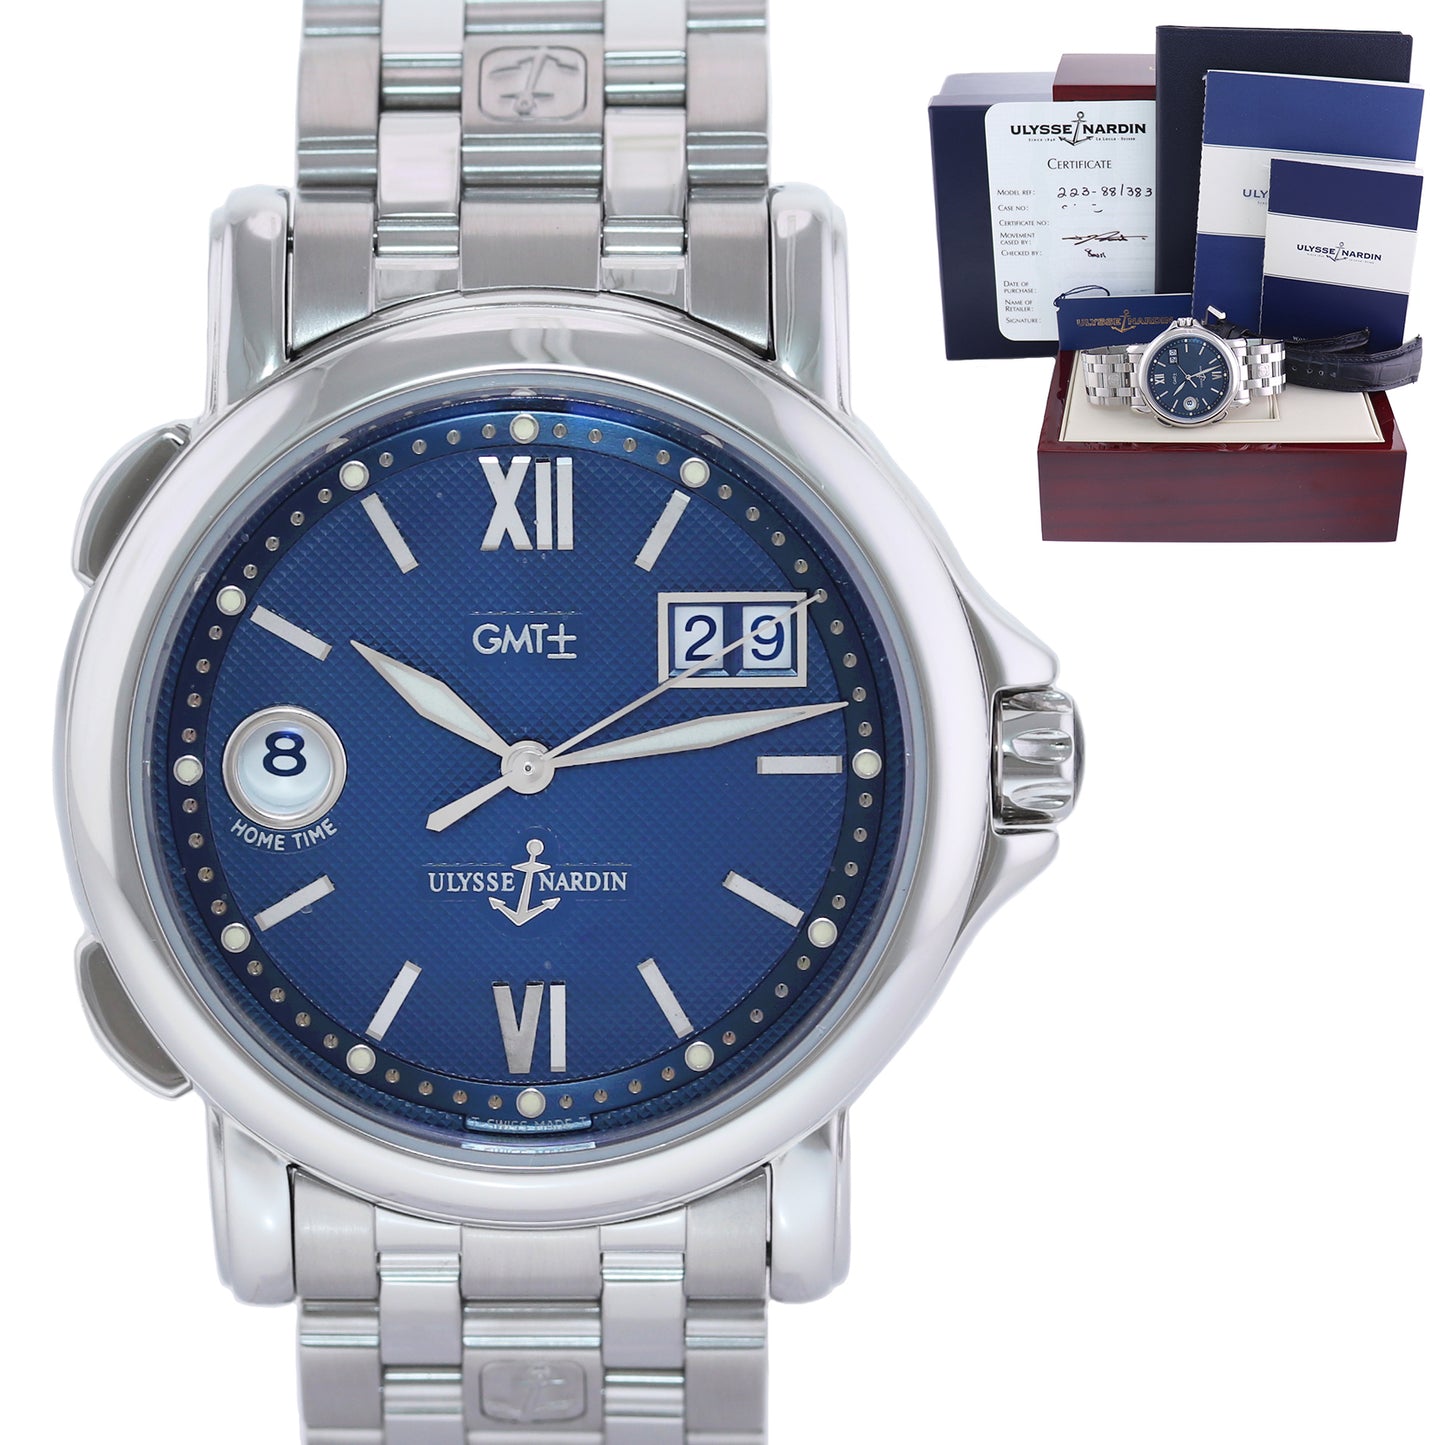 Ulysse Nardin San Marco GMT Big Date 40mm 223-88/383 Stainless Steel Blue Dial Mens Watch Box Papers